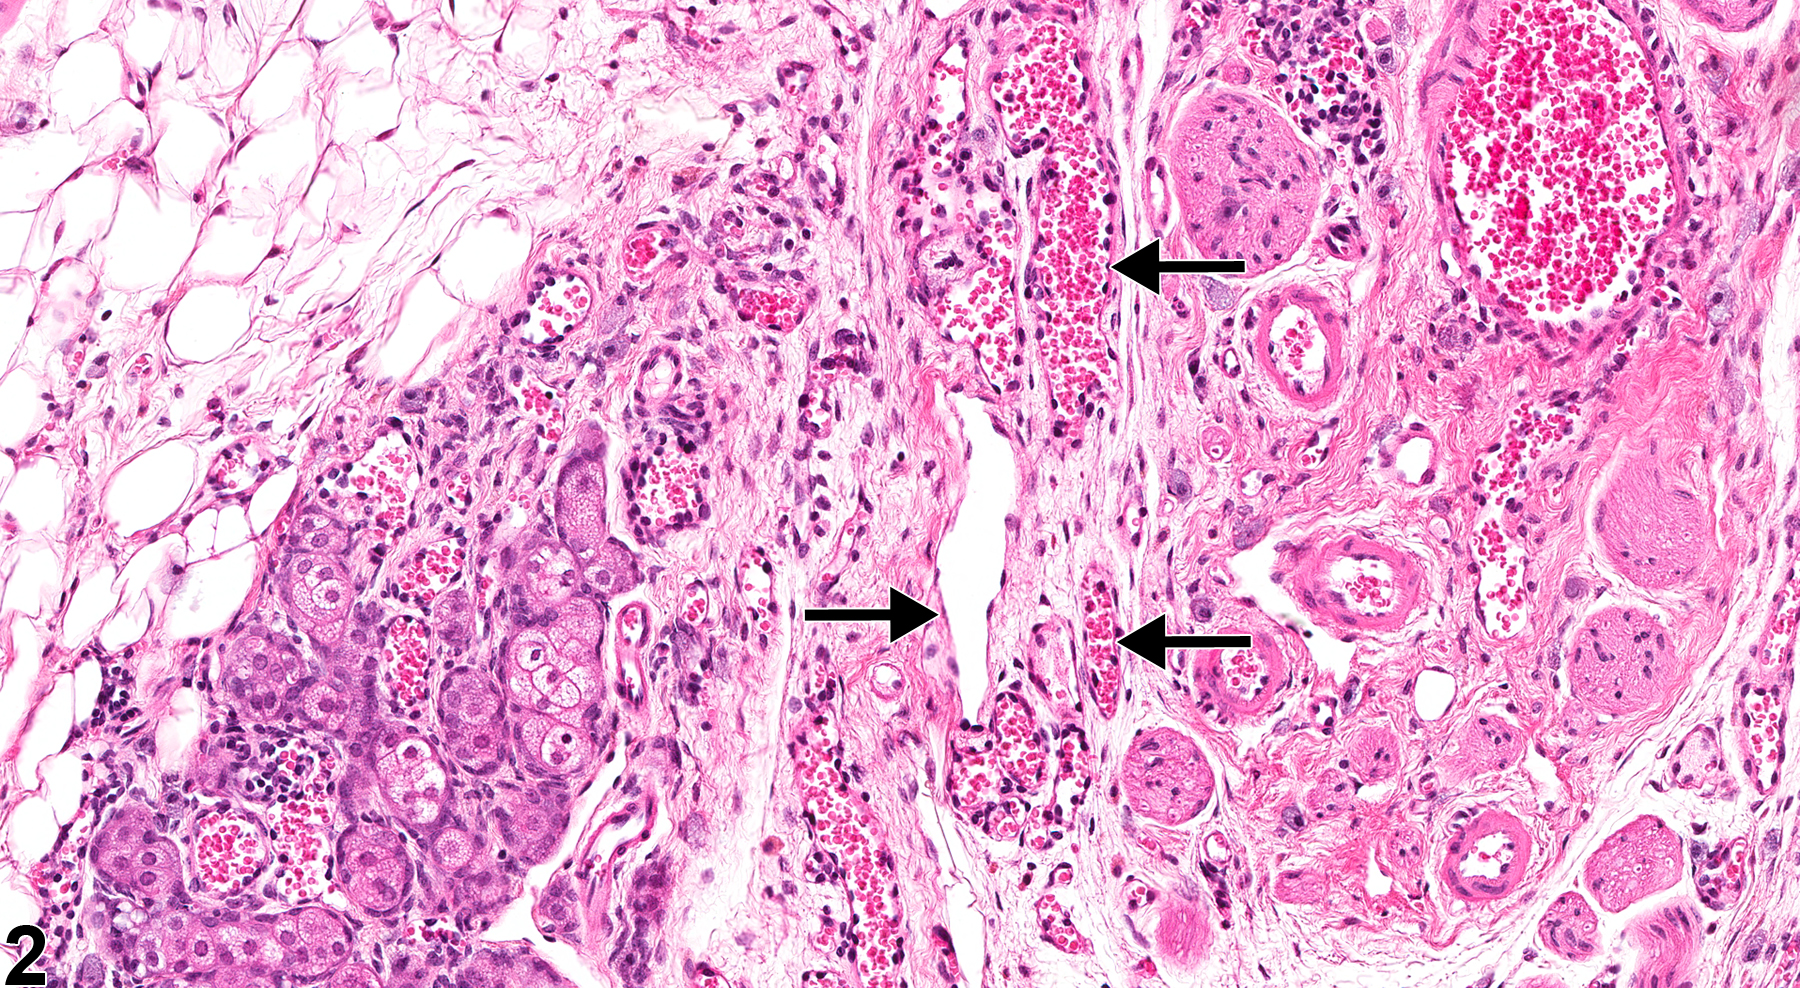 Image of angiectasis in the clitoral gland from a female B6C3F1 mouse in a chronic study